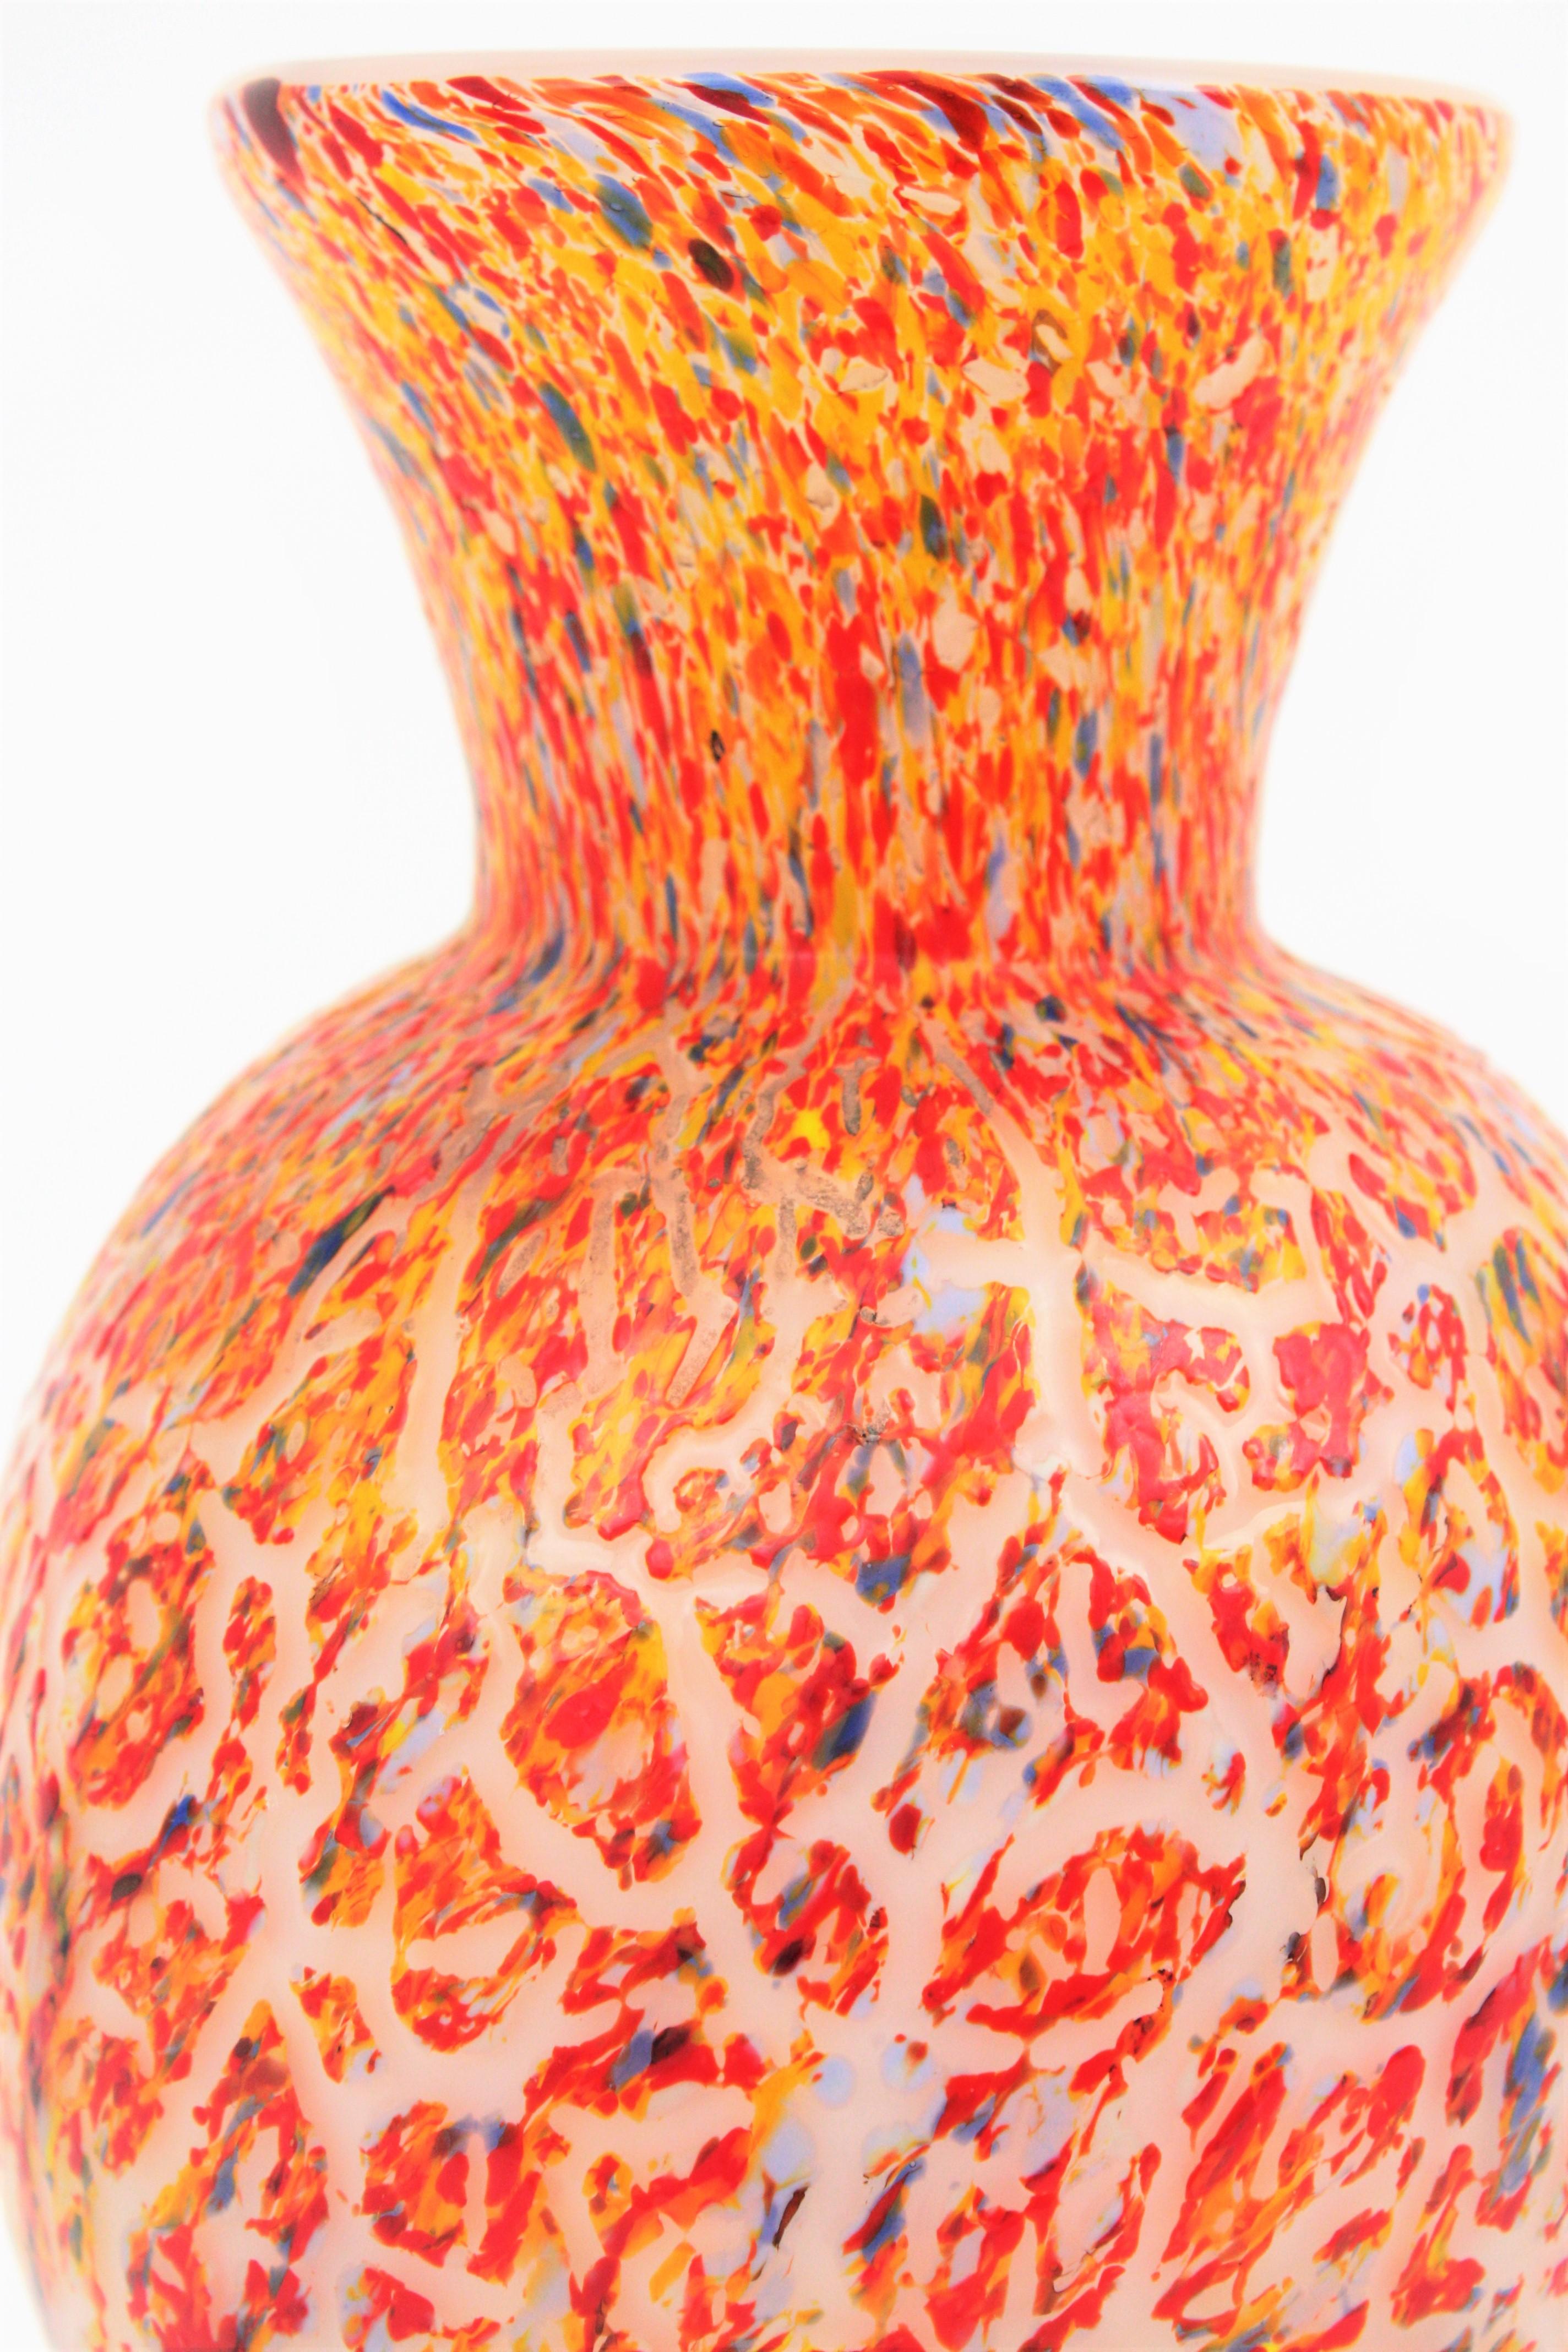 Murano Textured Italian Art multi-color confetti glass vase, Italy, 1960s
Beautiful hand blown Italian art Murano multi-color glass vase with textured surface and clear glass foot. 
Lovely to be used as decorative vase or flower vase. Perfect as a